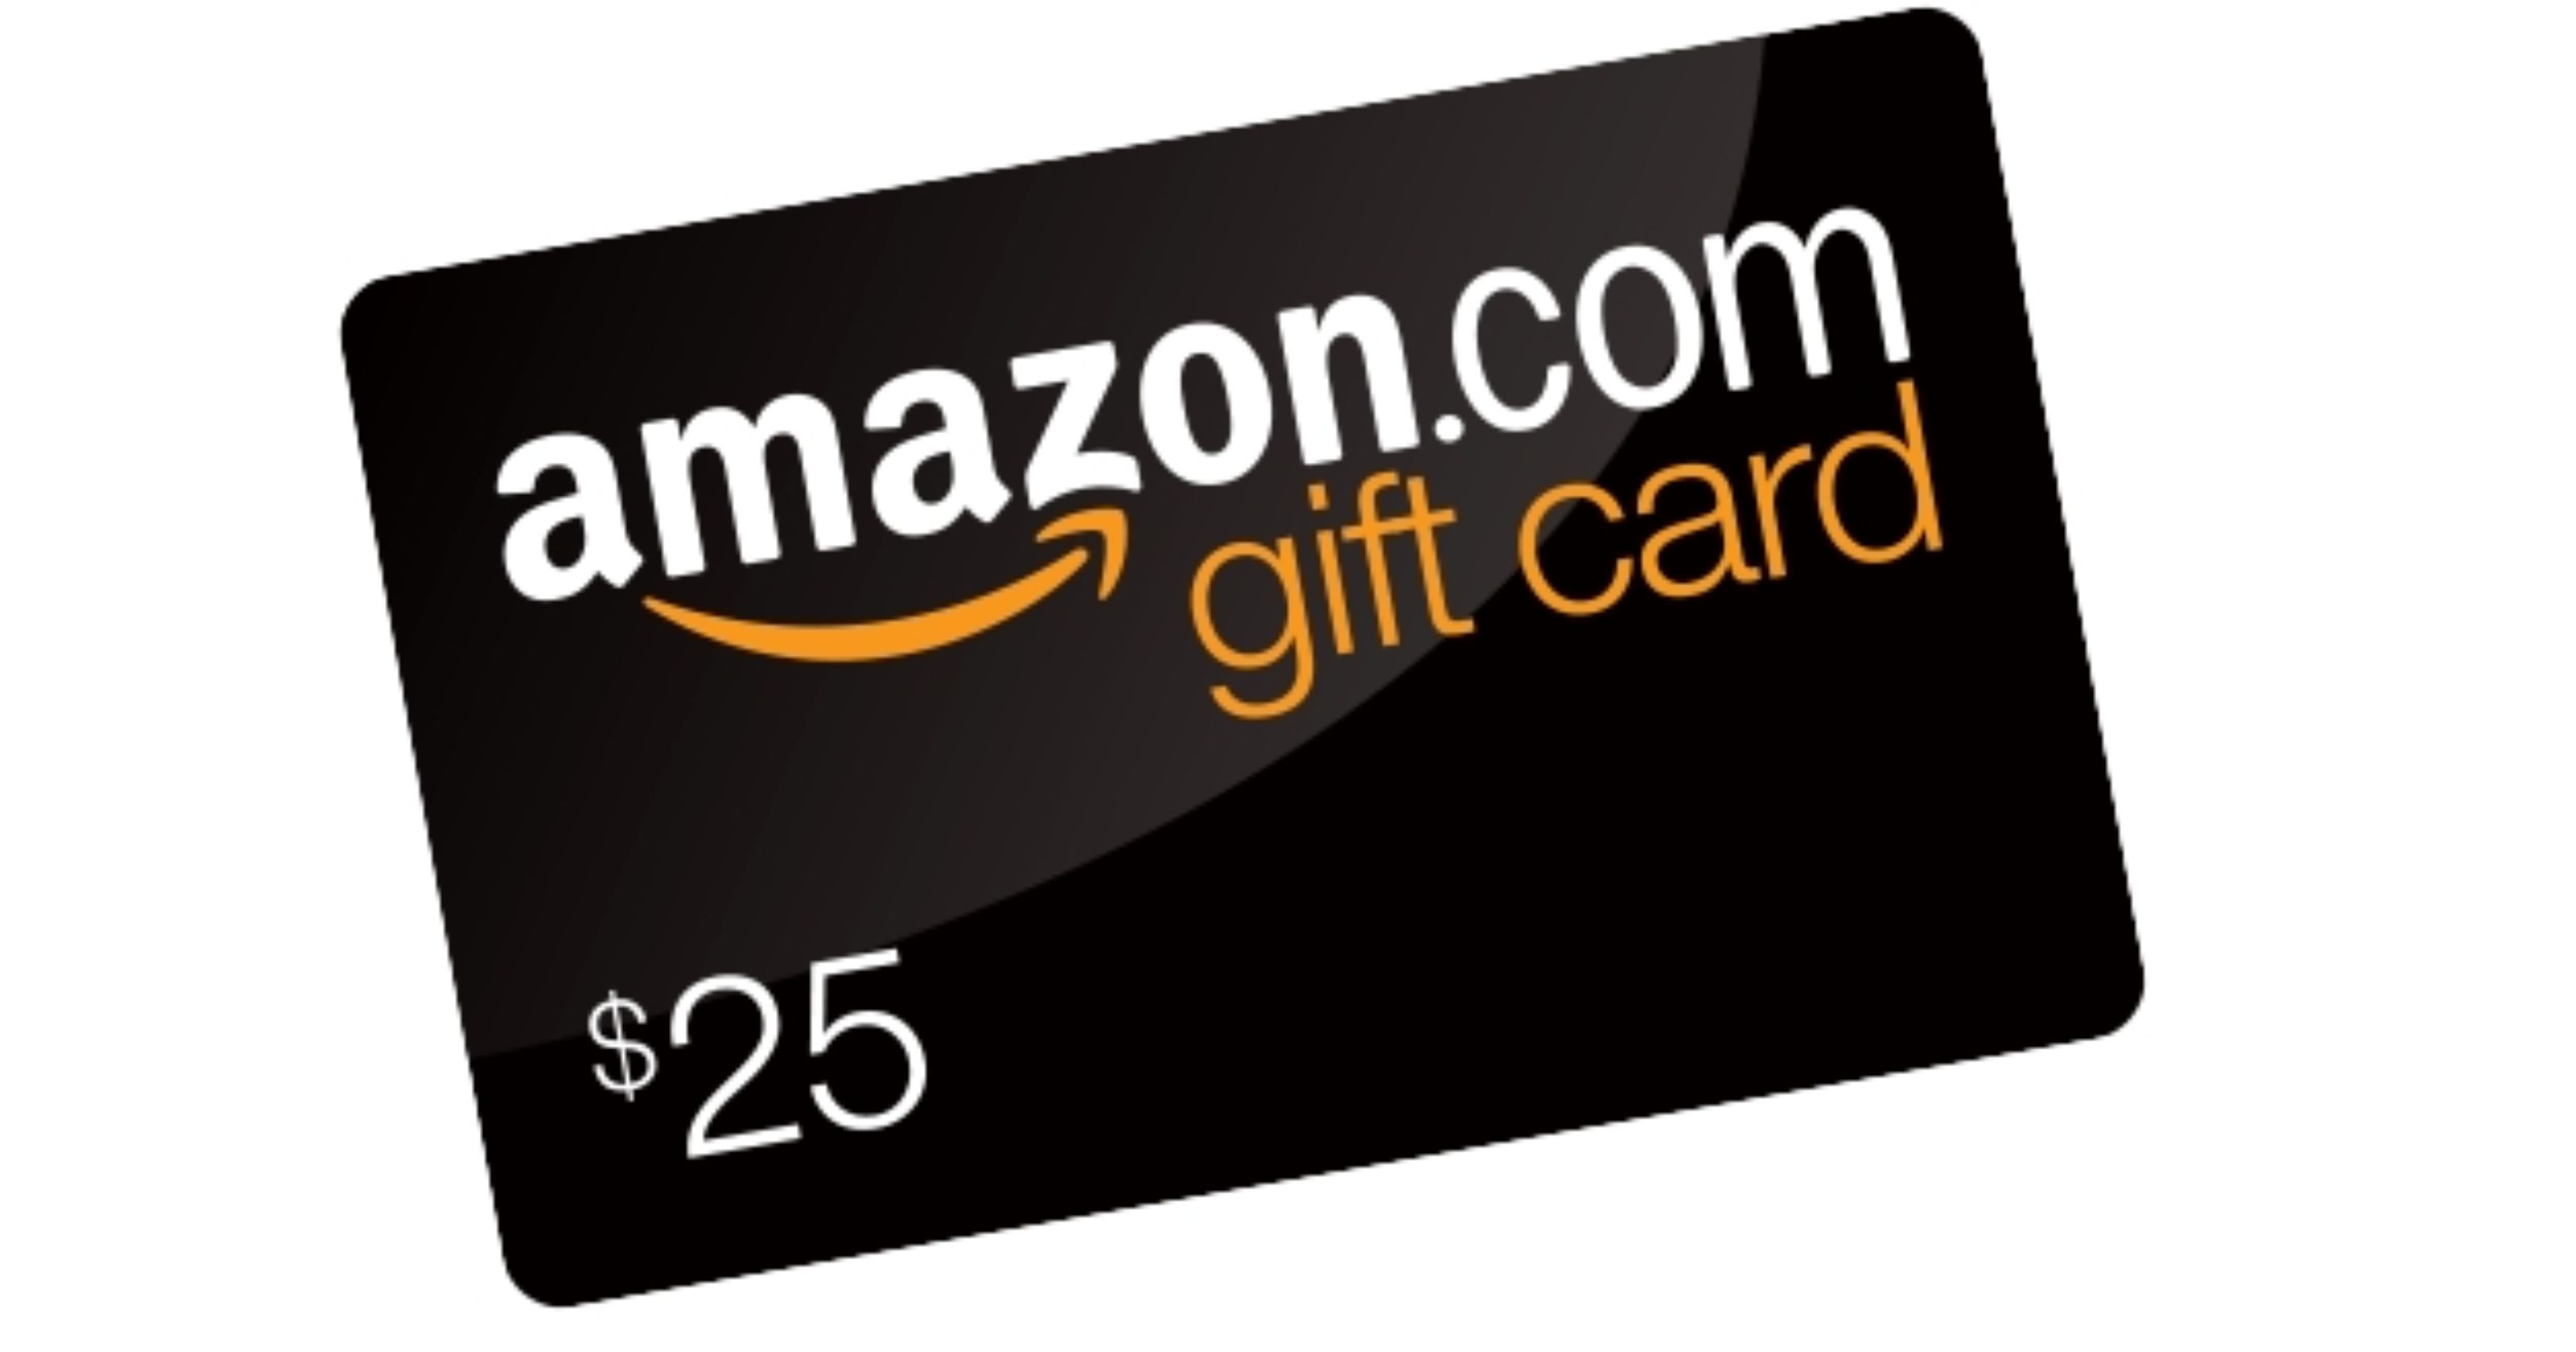 Buy a 25 Amazon Gift Card, Get 5 Credit Southern Savers